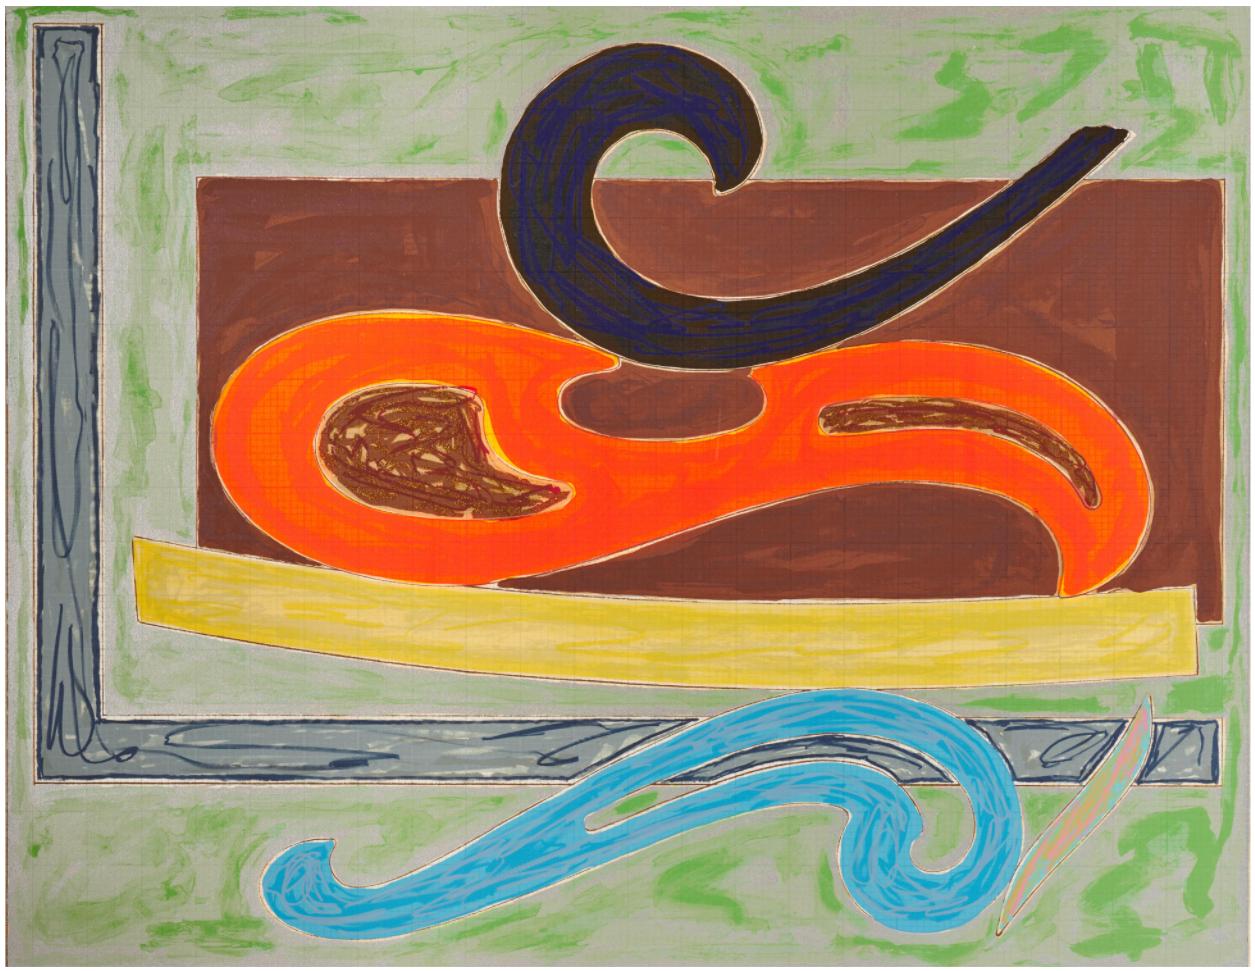 Frank Stella's Eskimo Curlew, From Exotic Bird Series, 1977 is a Lithograph and screenprint in colors, on Arches 88 mould-made paper, signed, dated and numbered out of 50 in graphite (there were also 14 artist's proofs). Published by Tyler Graphics